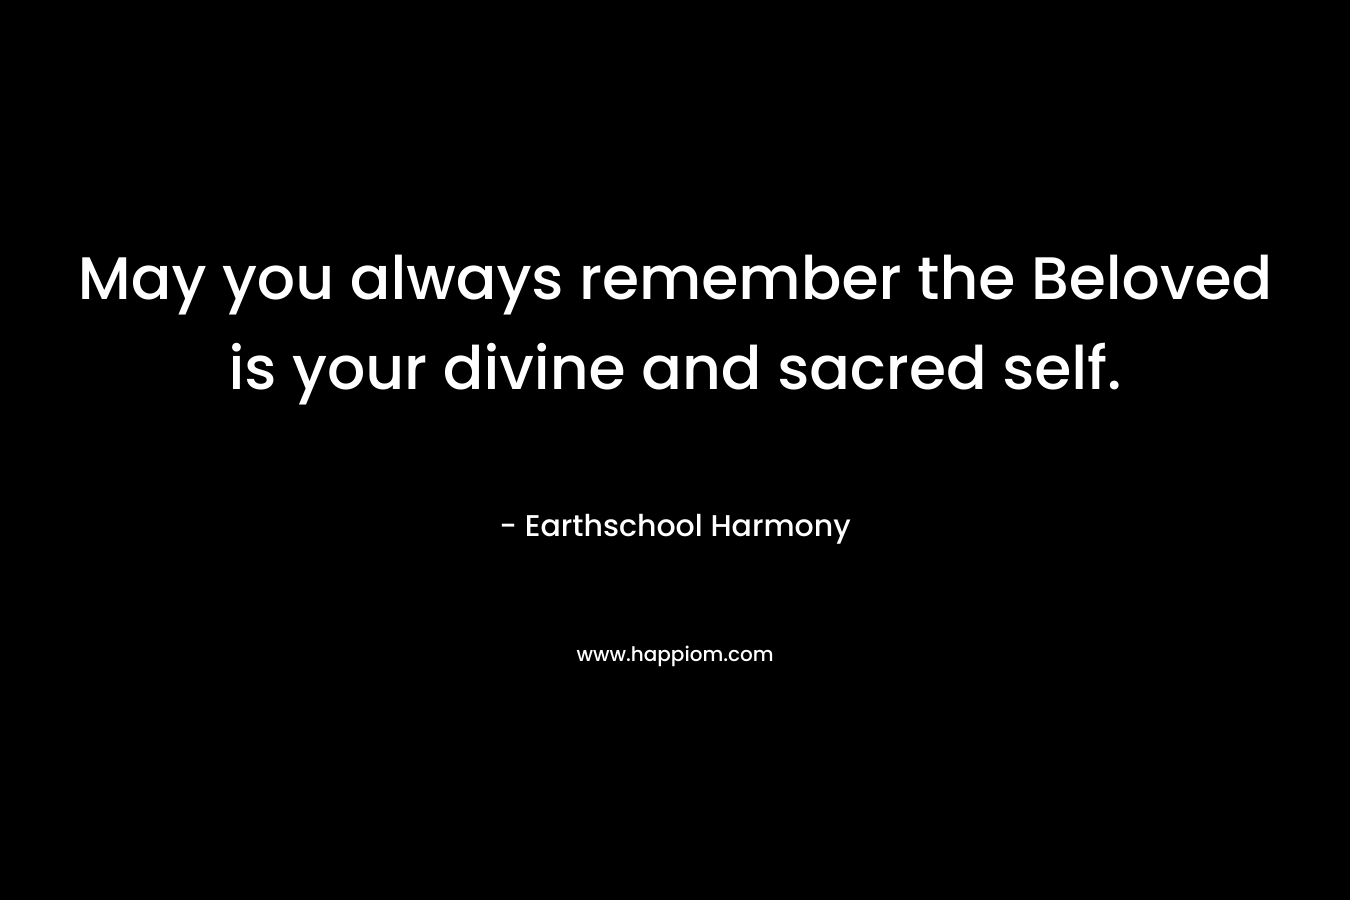 May you always remember the Beloved is your divine and sacred self.